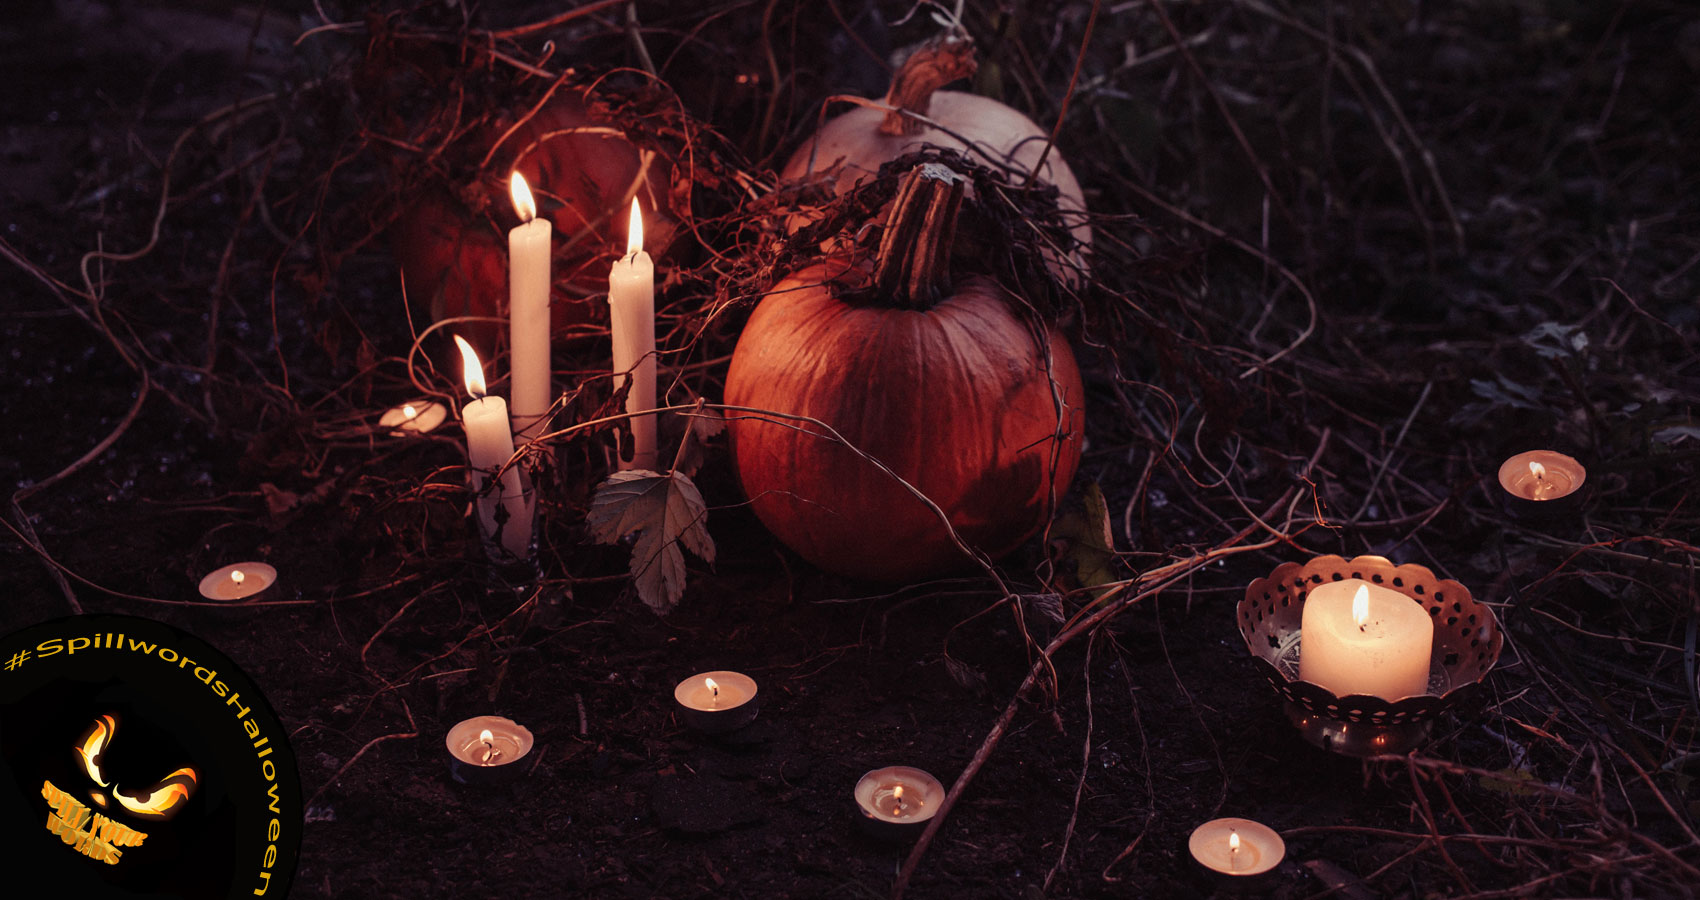 All Hallows' Eve History, poetry by Sharona Reeves at Spillwords.com